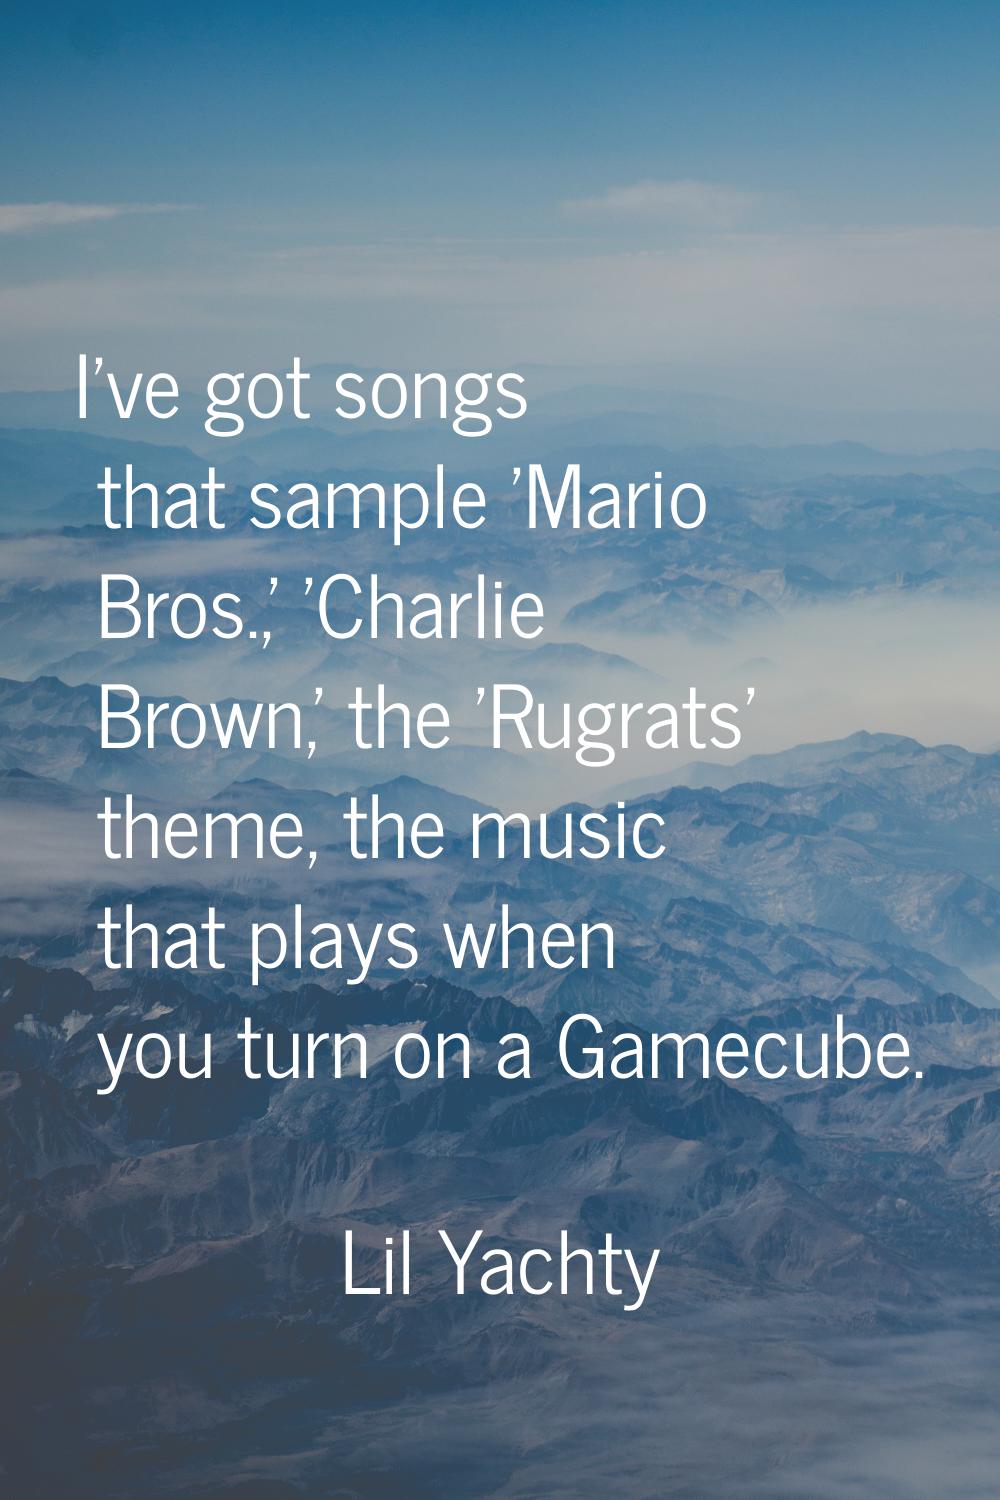 I've got songs that sample 'Mario Bros.,' 'Charlie Brown,' the 'Rugrats' theme, the music that play